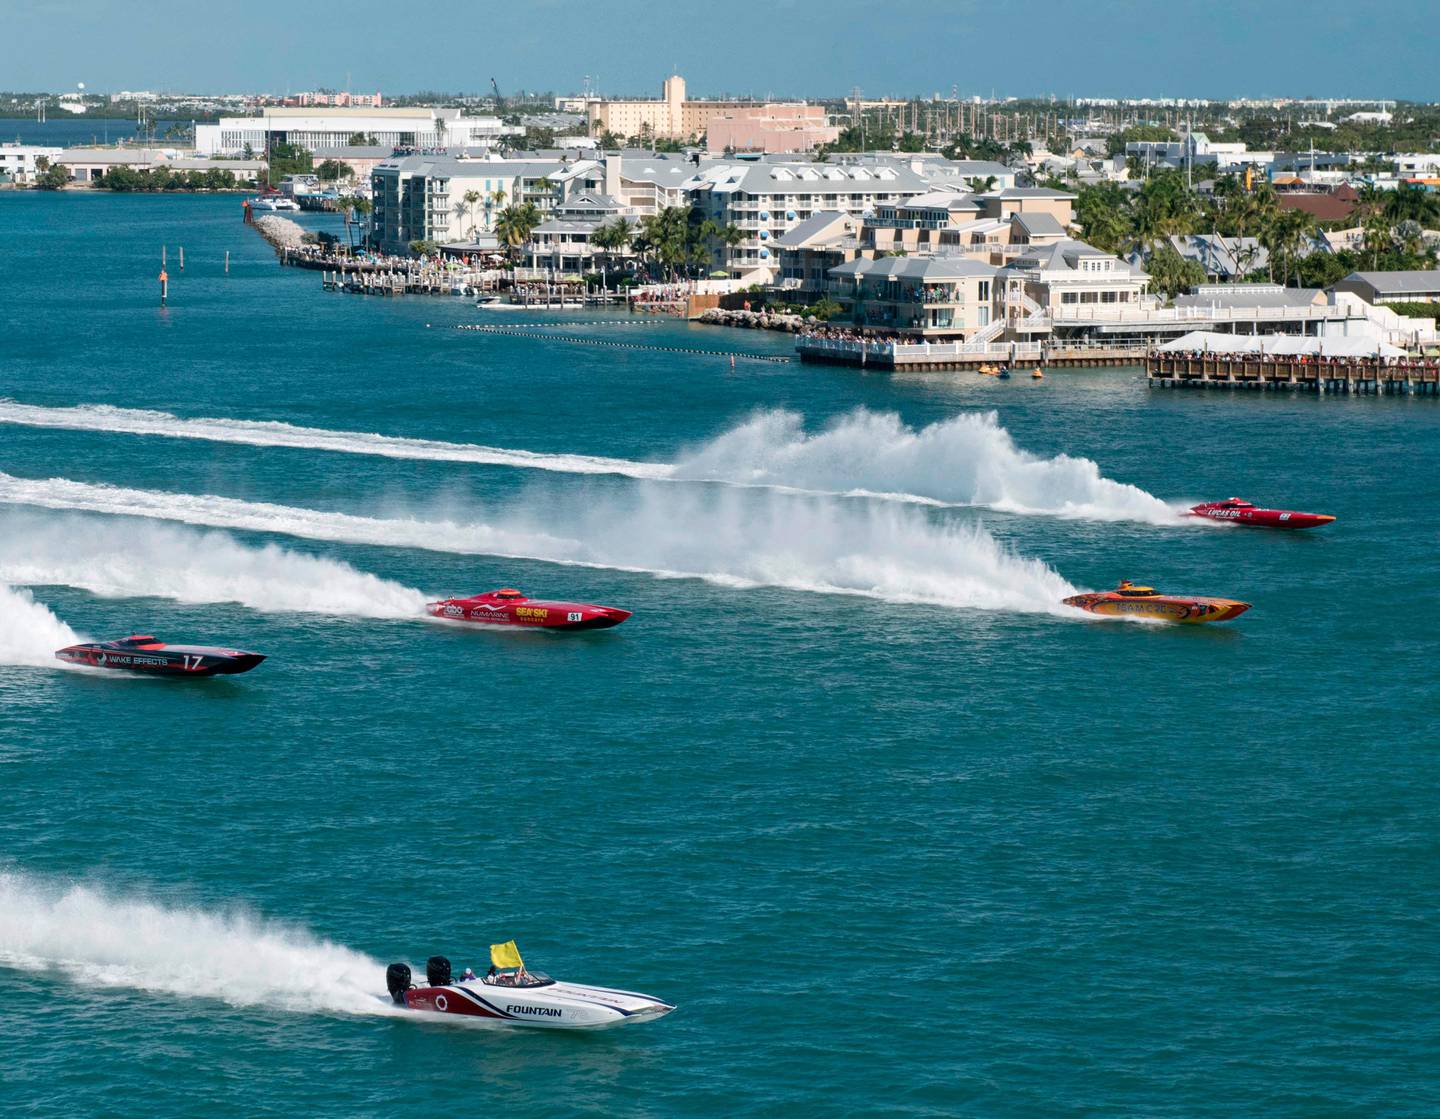 This image courtesy of the Florida Keys News Bureau, Superboat Unlimited-class boats cross the start line on November 7, 2018, at the Key West World Championship in Key West, Florida. - The event, with additional race days scheduled November 9 and 11, has attracted 39 entries that are divided into seven classes. (Photo by Rob O'Neal / Florida Keys News Bureau / AFP) / RESTRICTED TO EDITORIAL USE - MANDATORY CREDIT "AFP PHOTO / Florida Keys News Bureau/ Rob O' Neal" - NO MARKETING NO ADVERTISING CAMPAIGNS - DISTRIBUTED AS A SERVICE TO CLIENTS